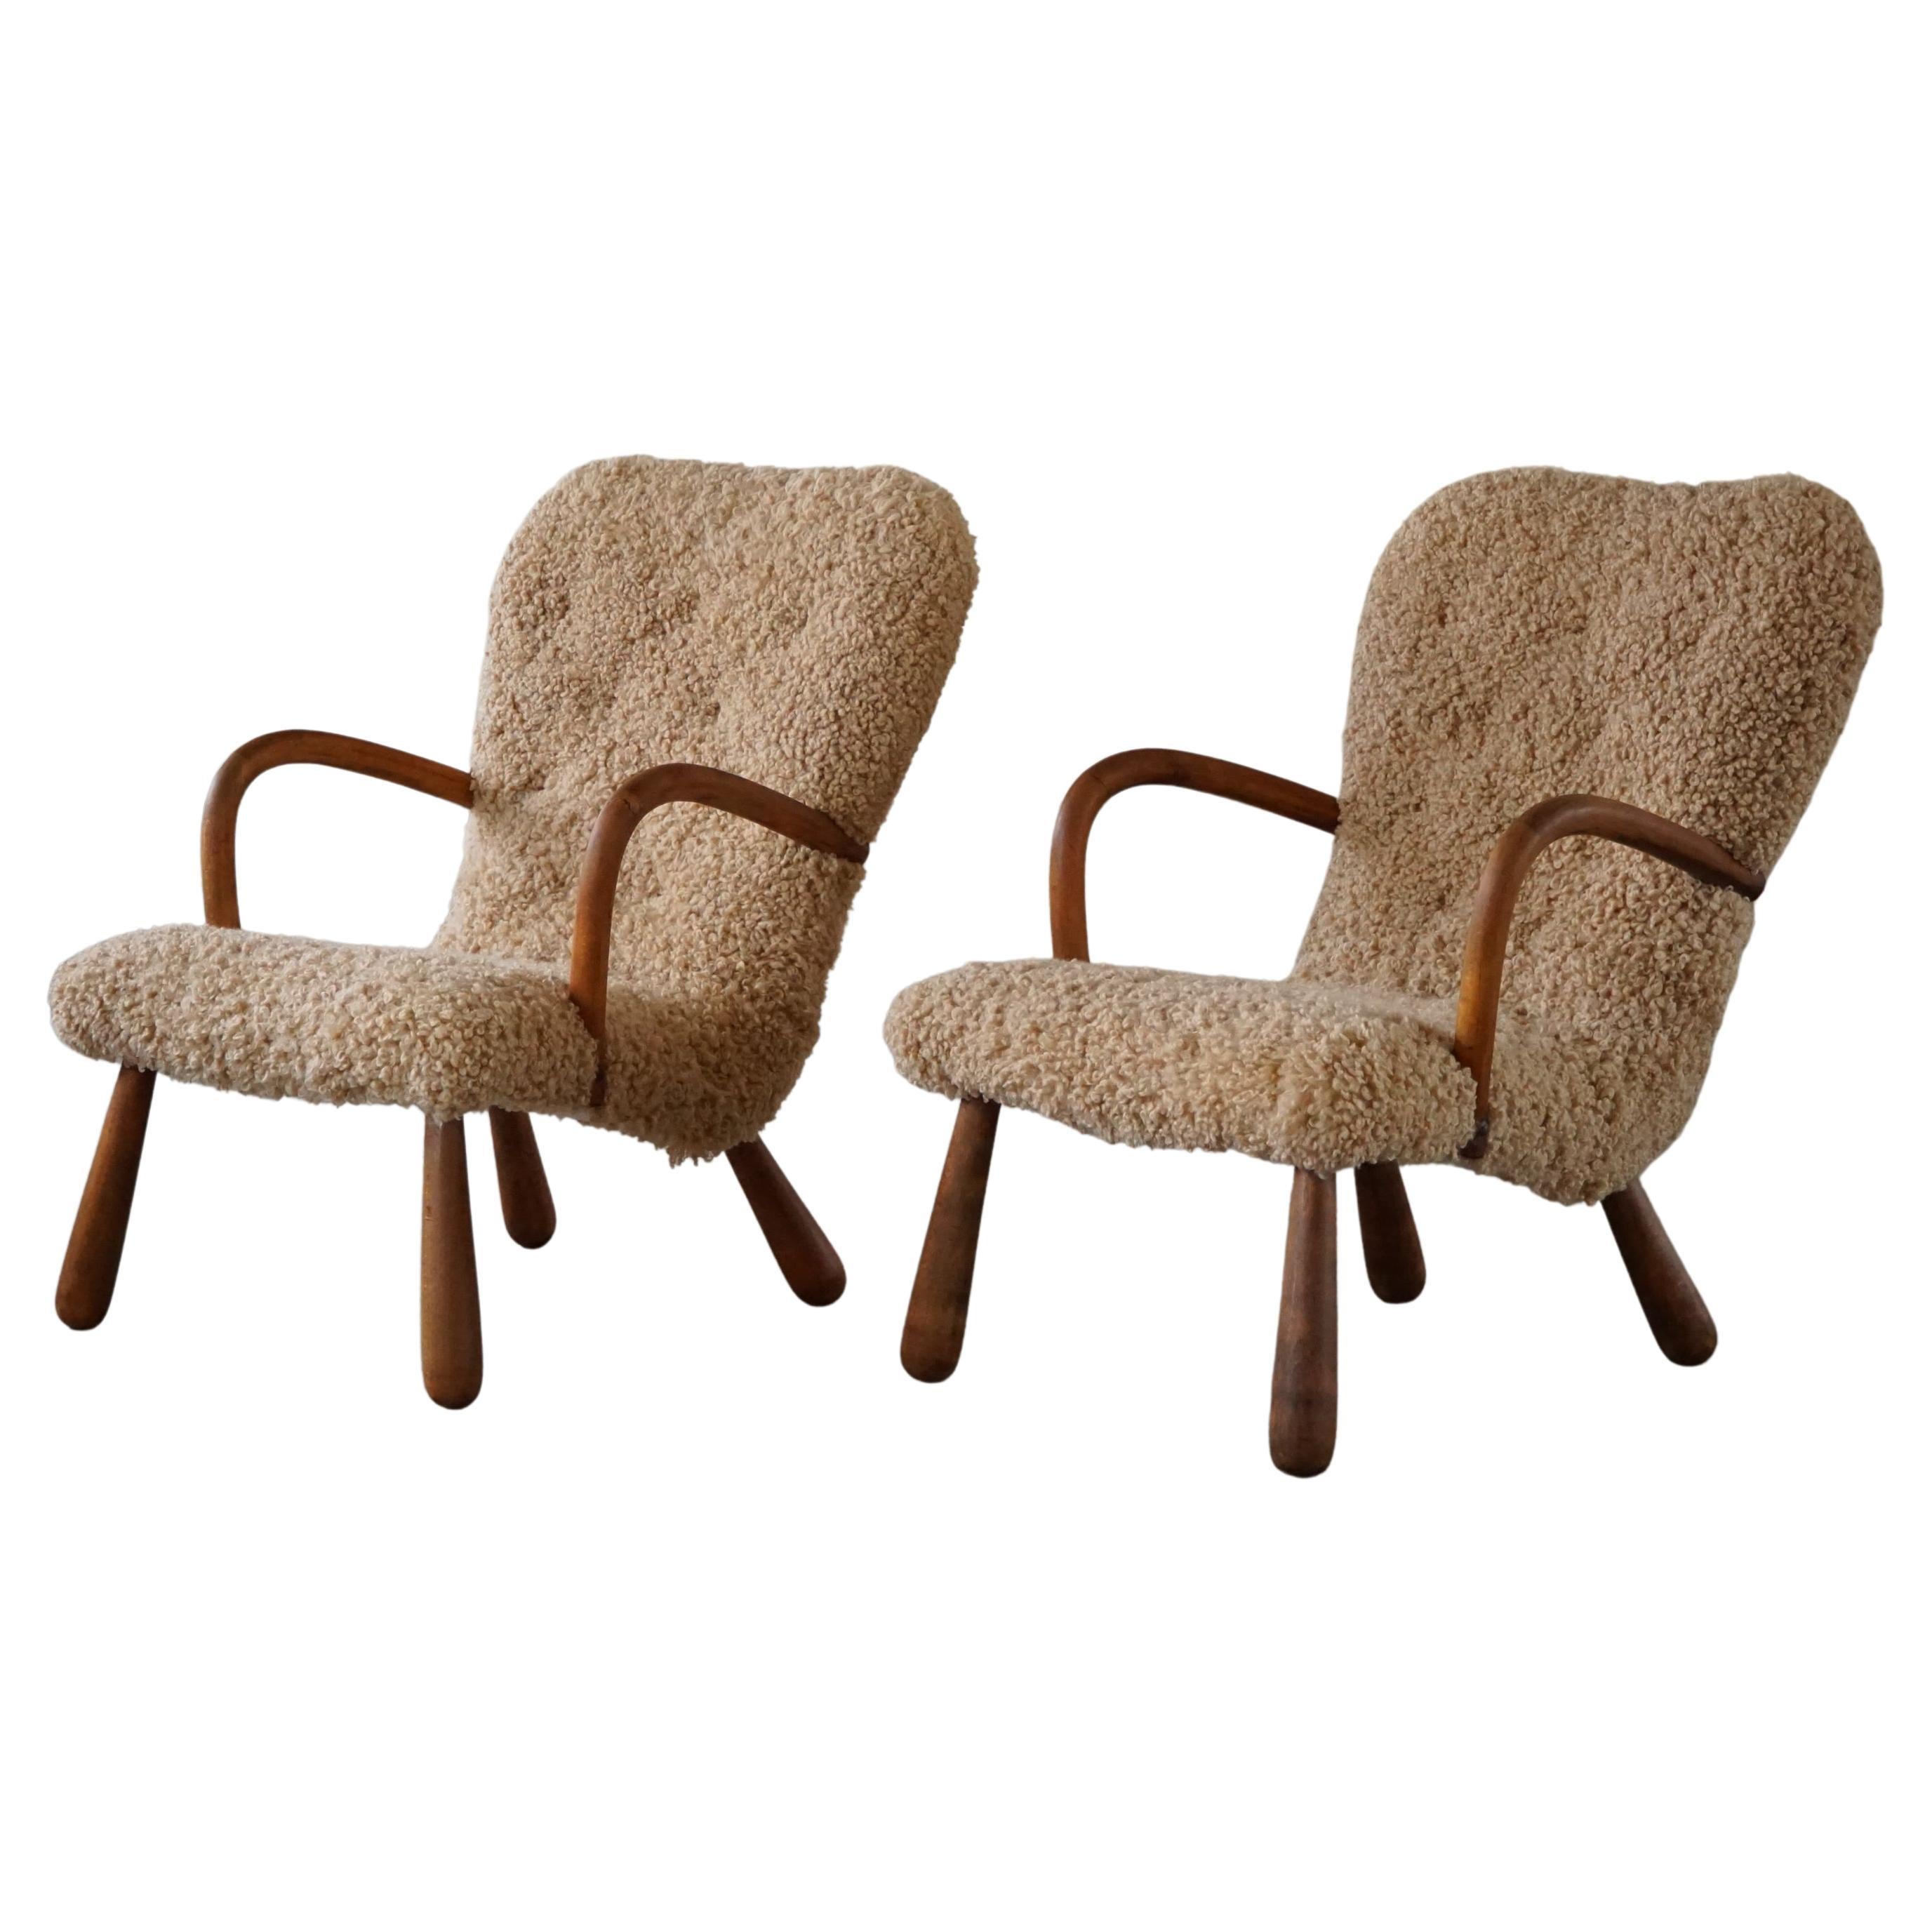 Pair of Clam Lounge Chairs in Lambswool, Skive Møbelfabrik, Denmark, 1950s